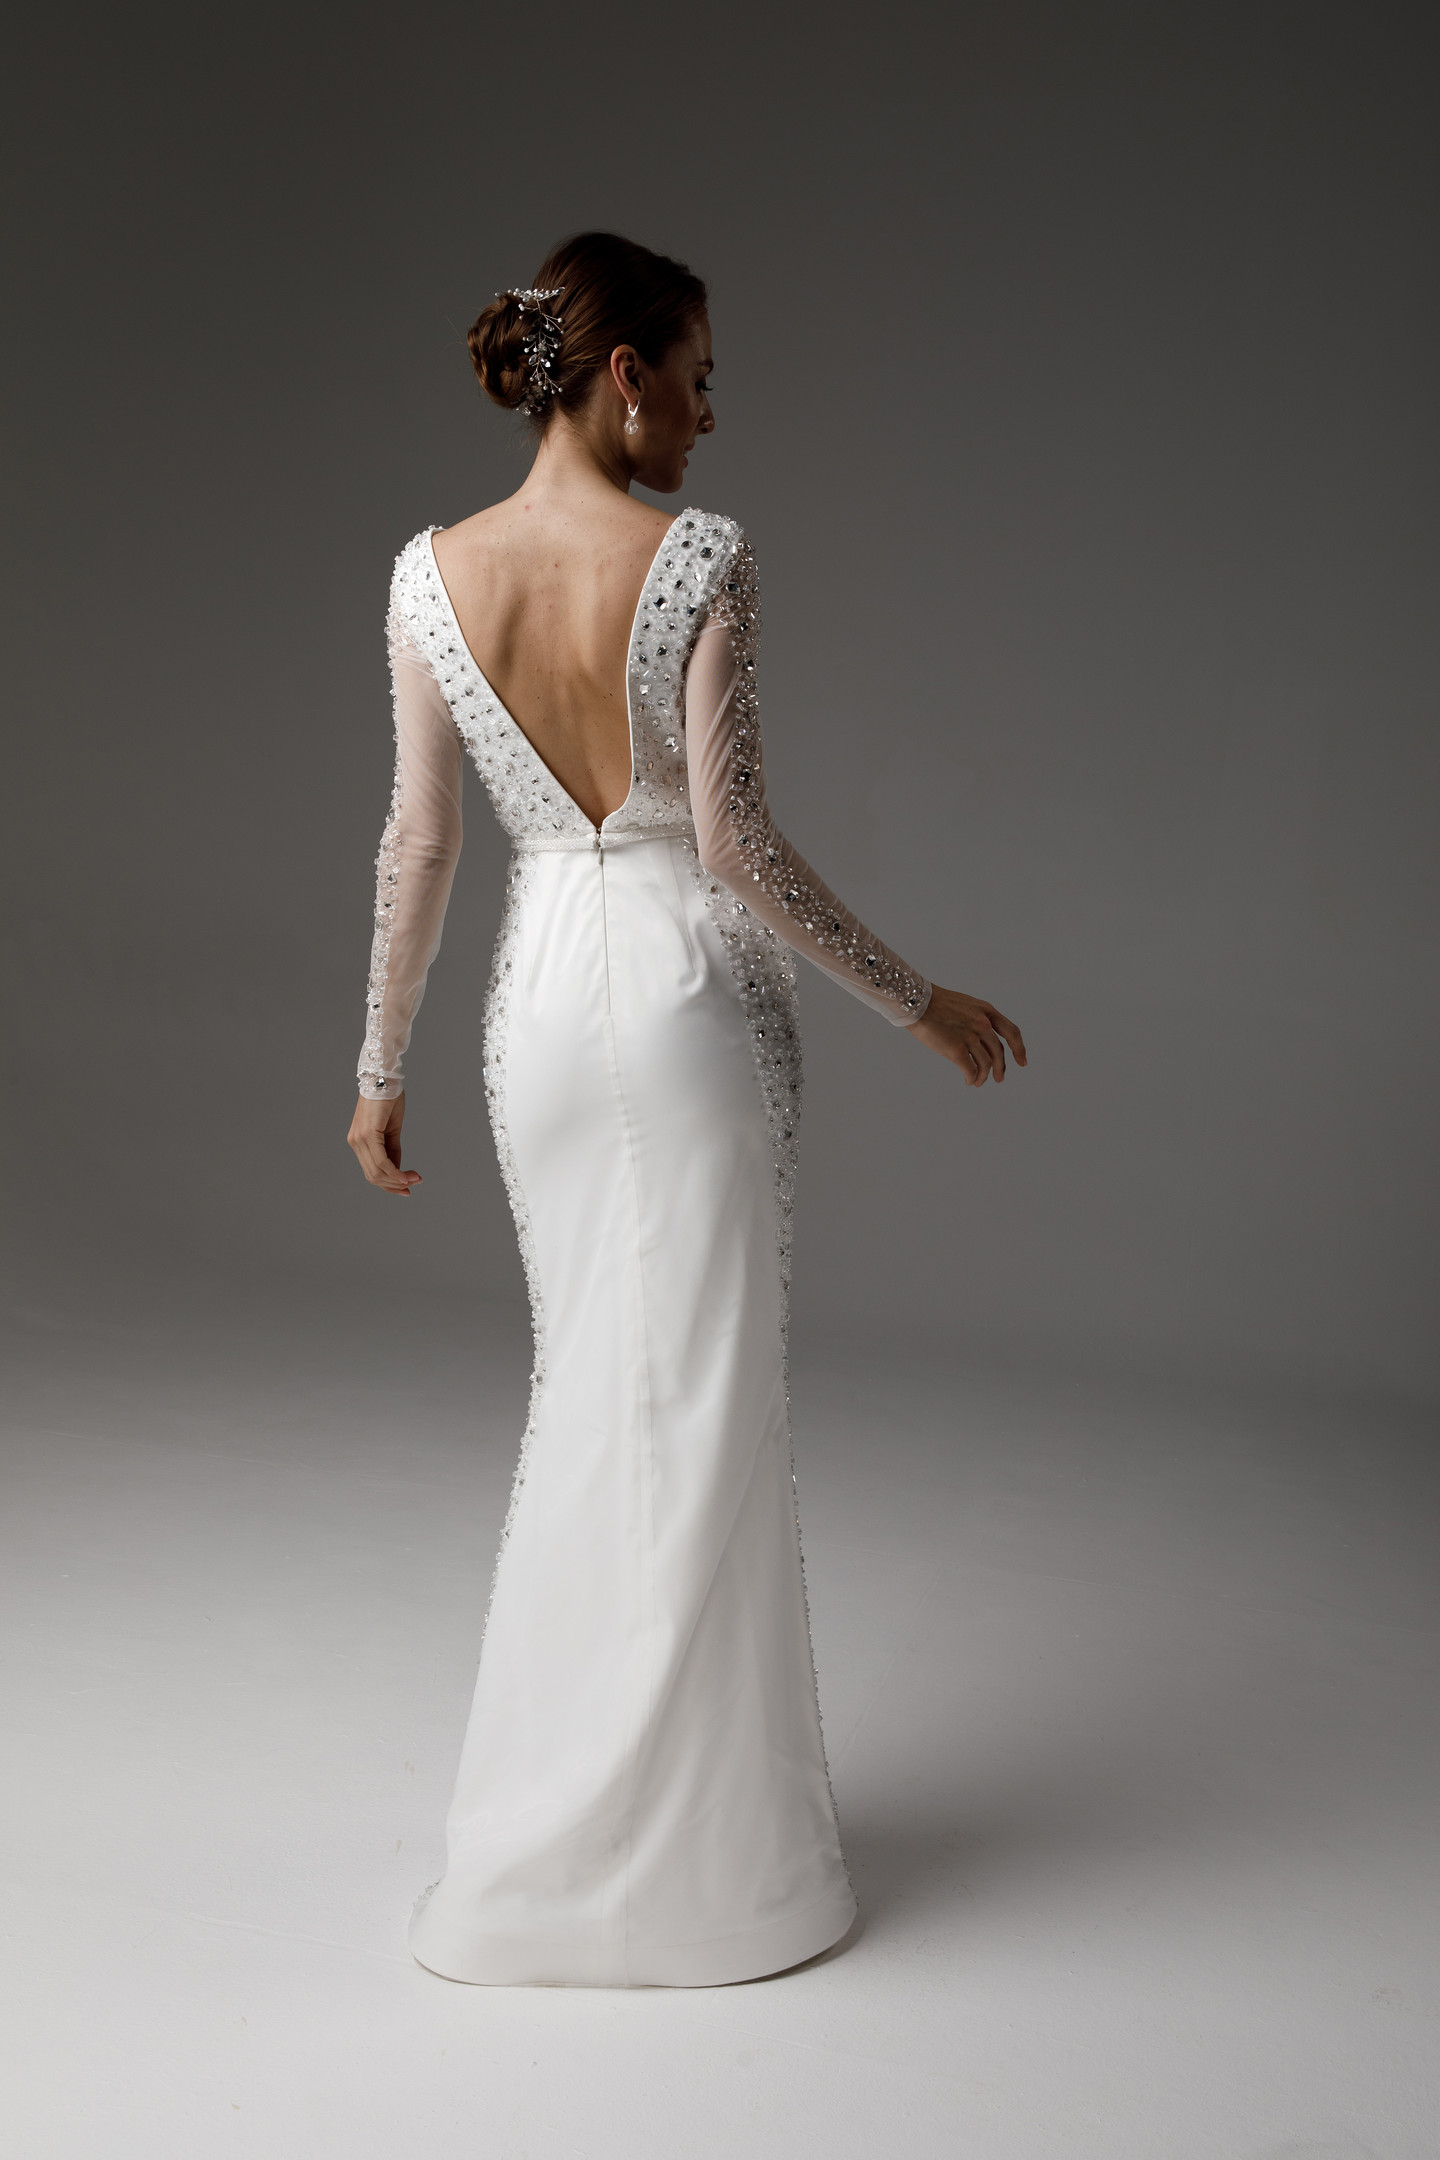 Raquel gown, 2021, couture, dress, bridal, off-white, embroidery, sheath silhouette, sleeves